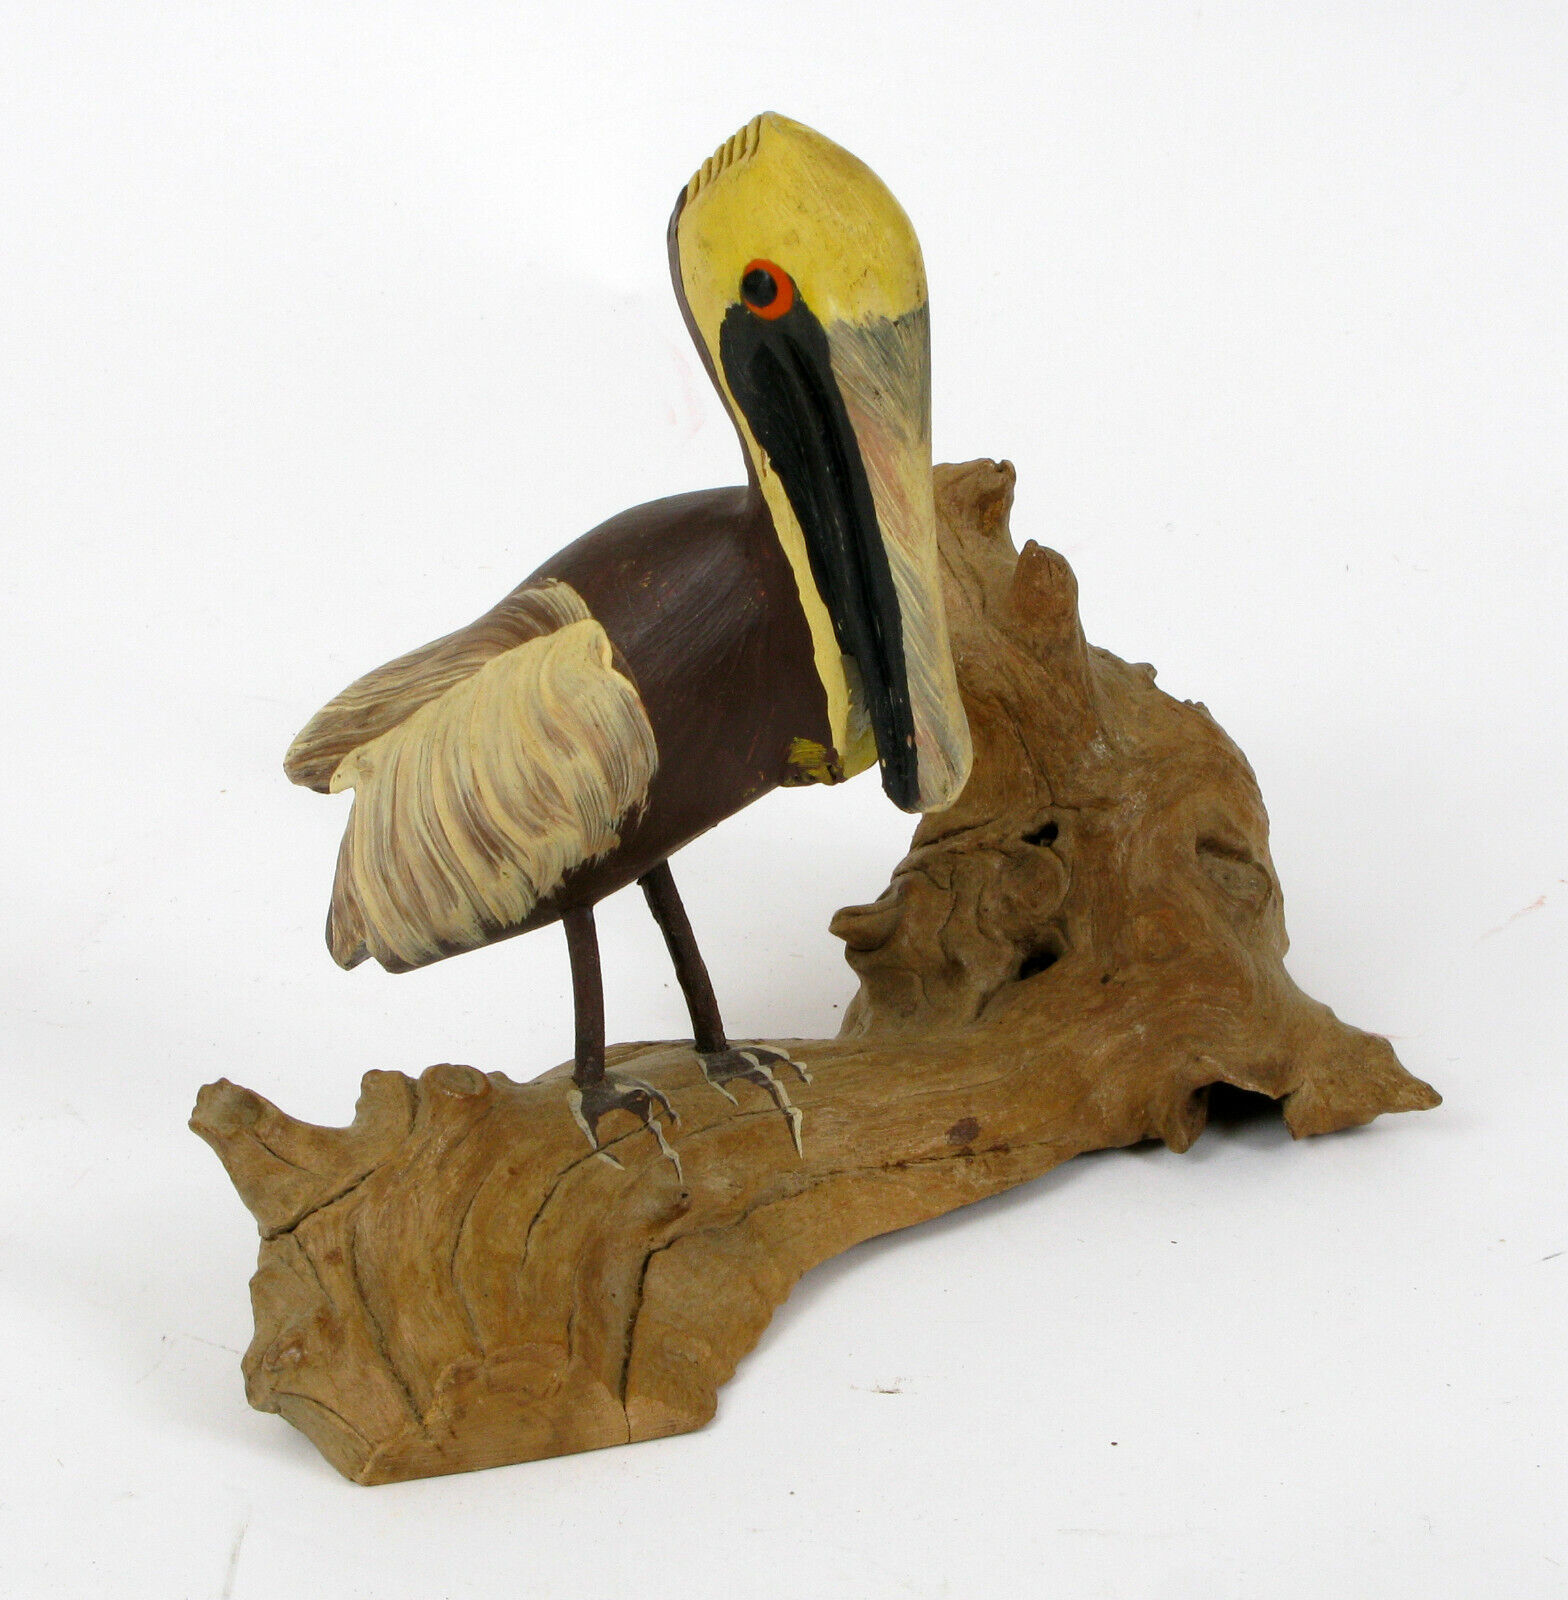 VINTAGE WOOD CARVED HAND PAINTED PELICAN BIRD ON DRIFTWOOD KEY WEST FLORIDA 